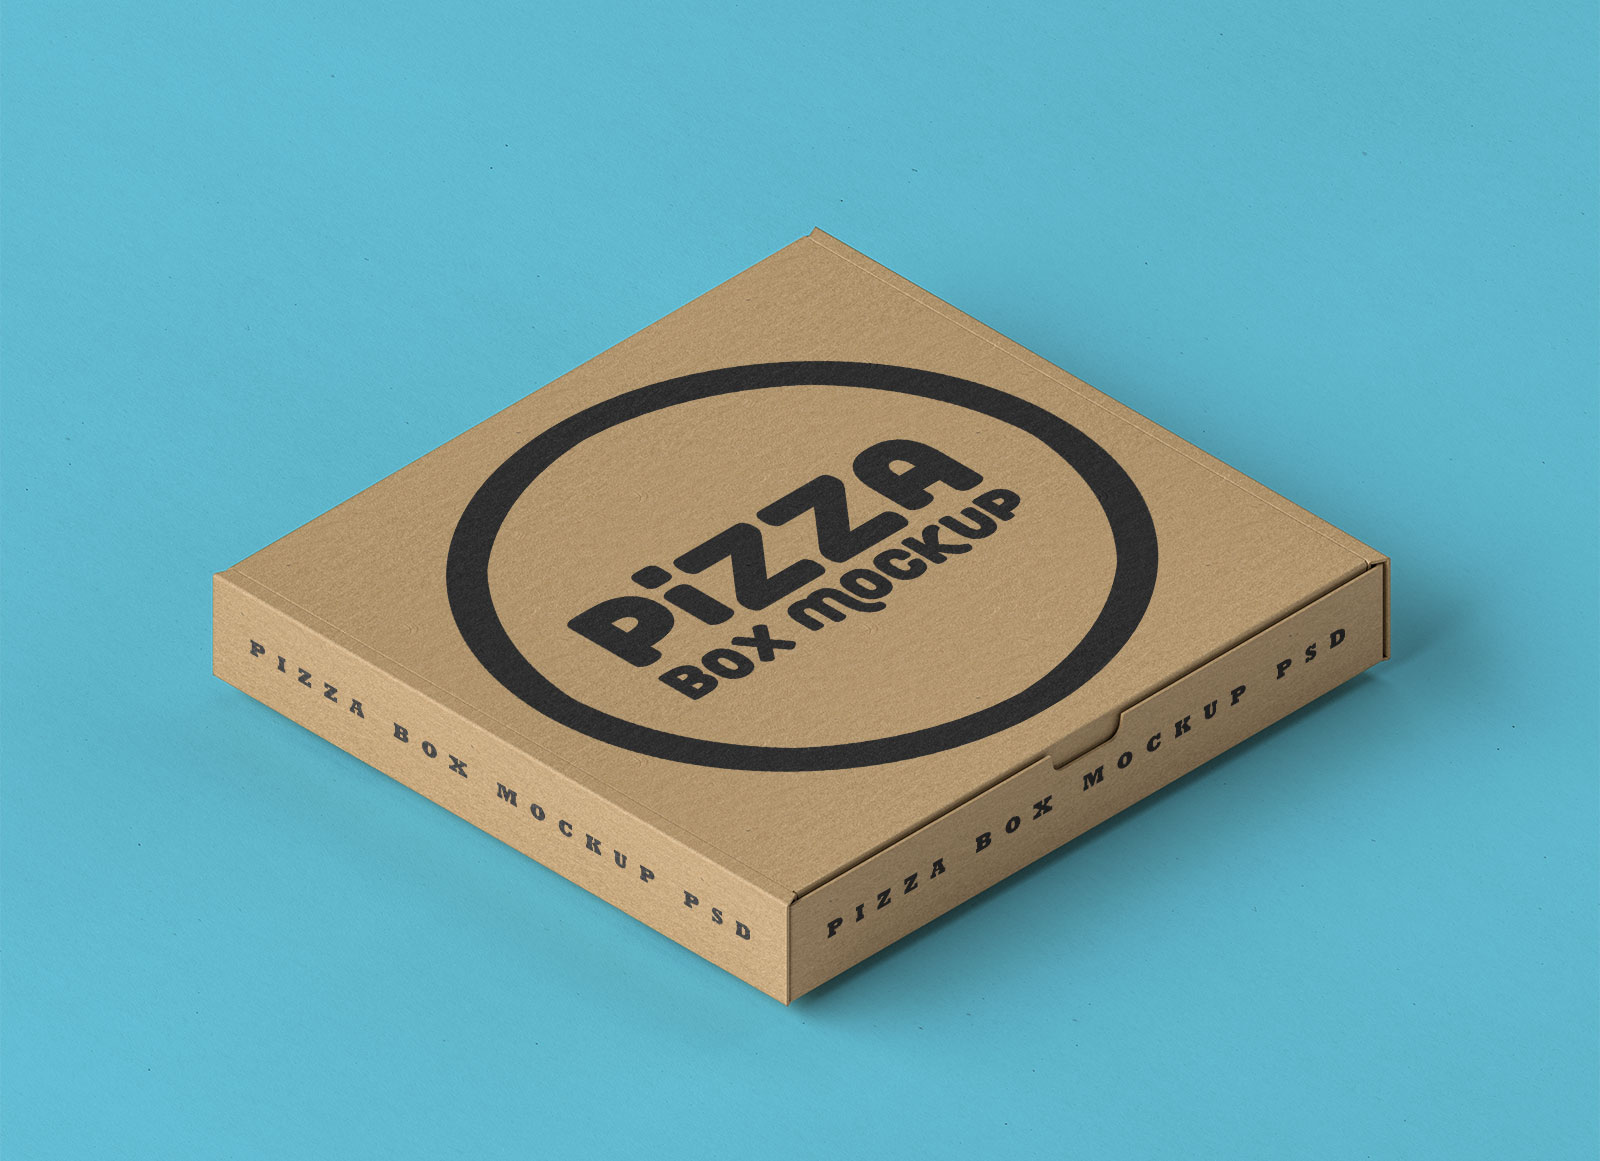 Wellpizza -Box -Verpackungsmodelle